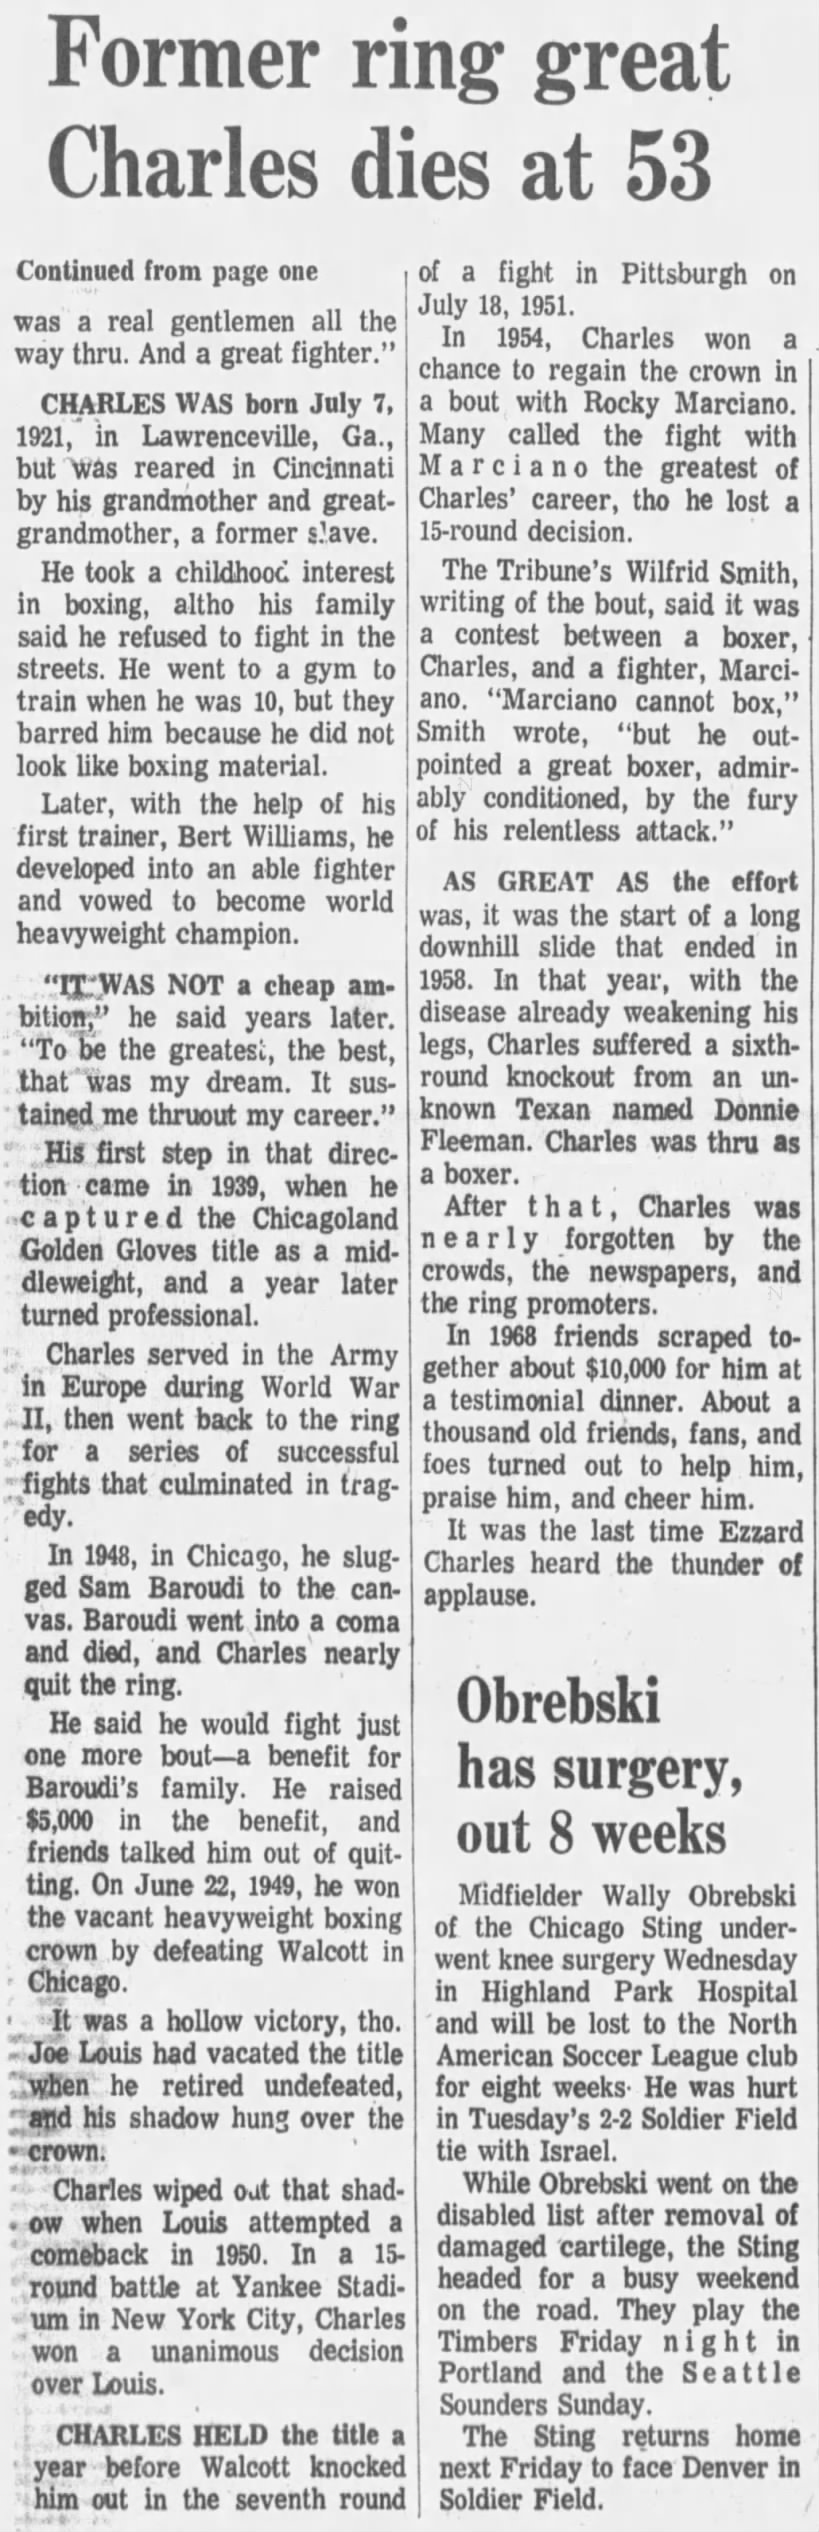 Ezzard Charles, boxing's 'Quiet Tiger,' dies at 53 (part 2)